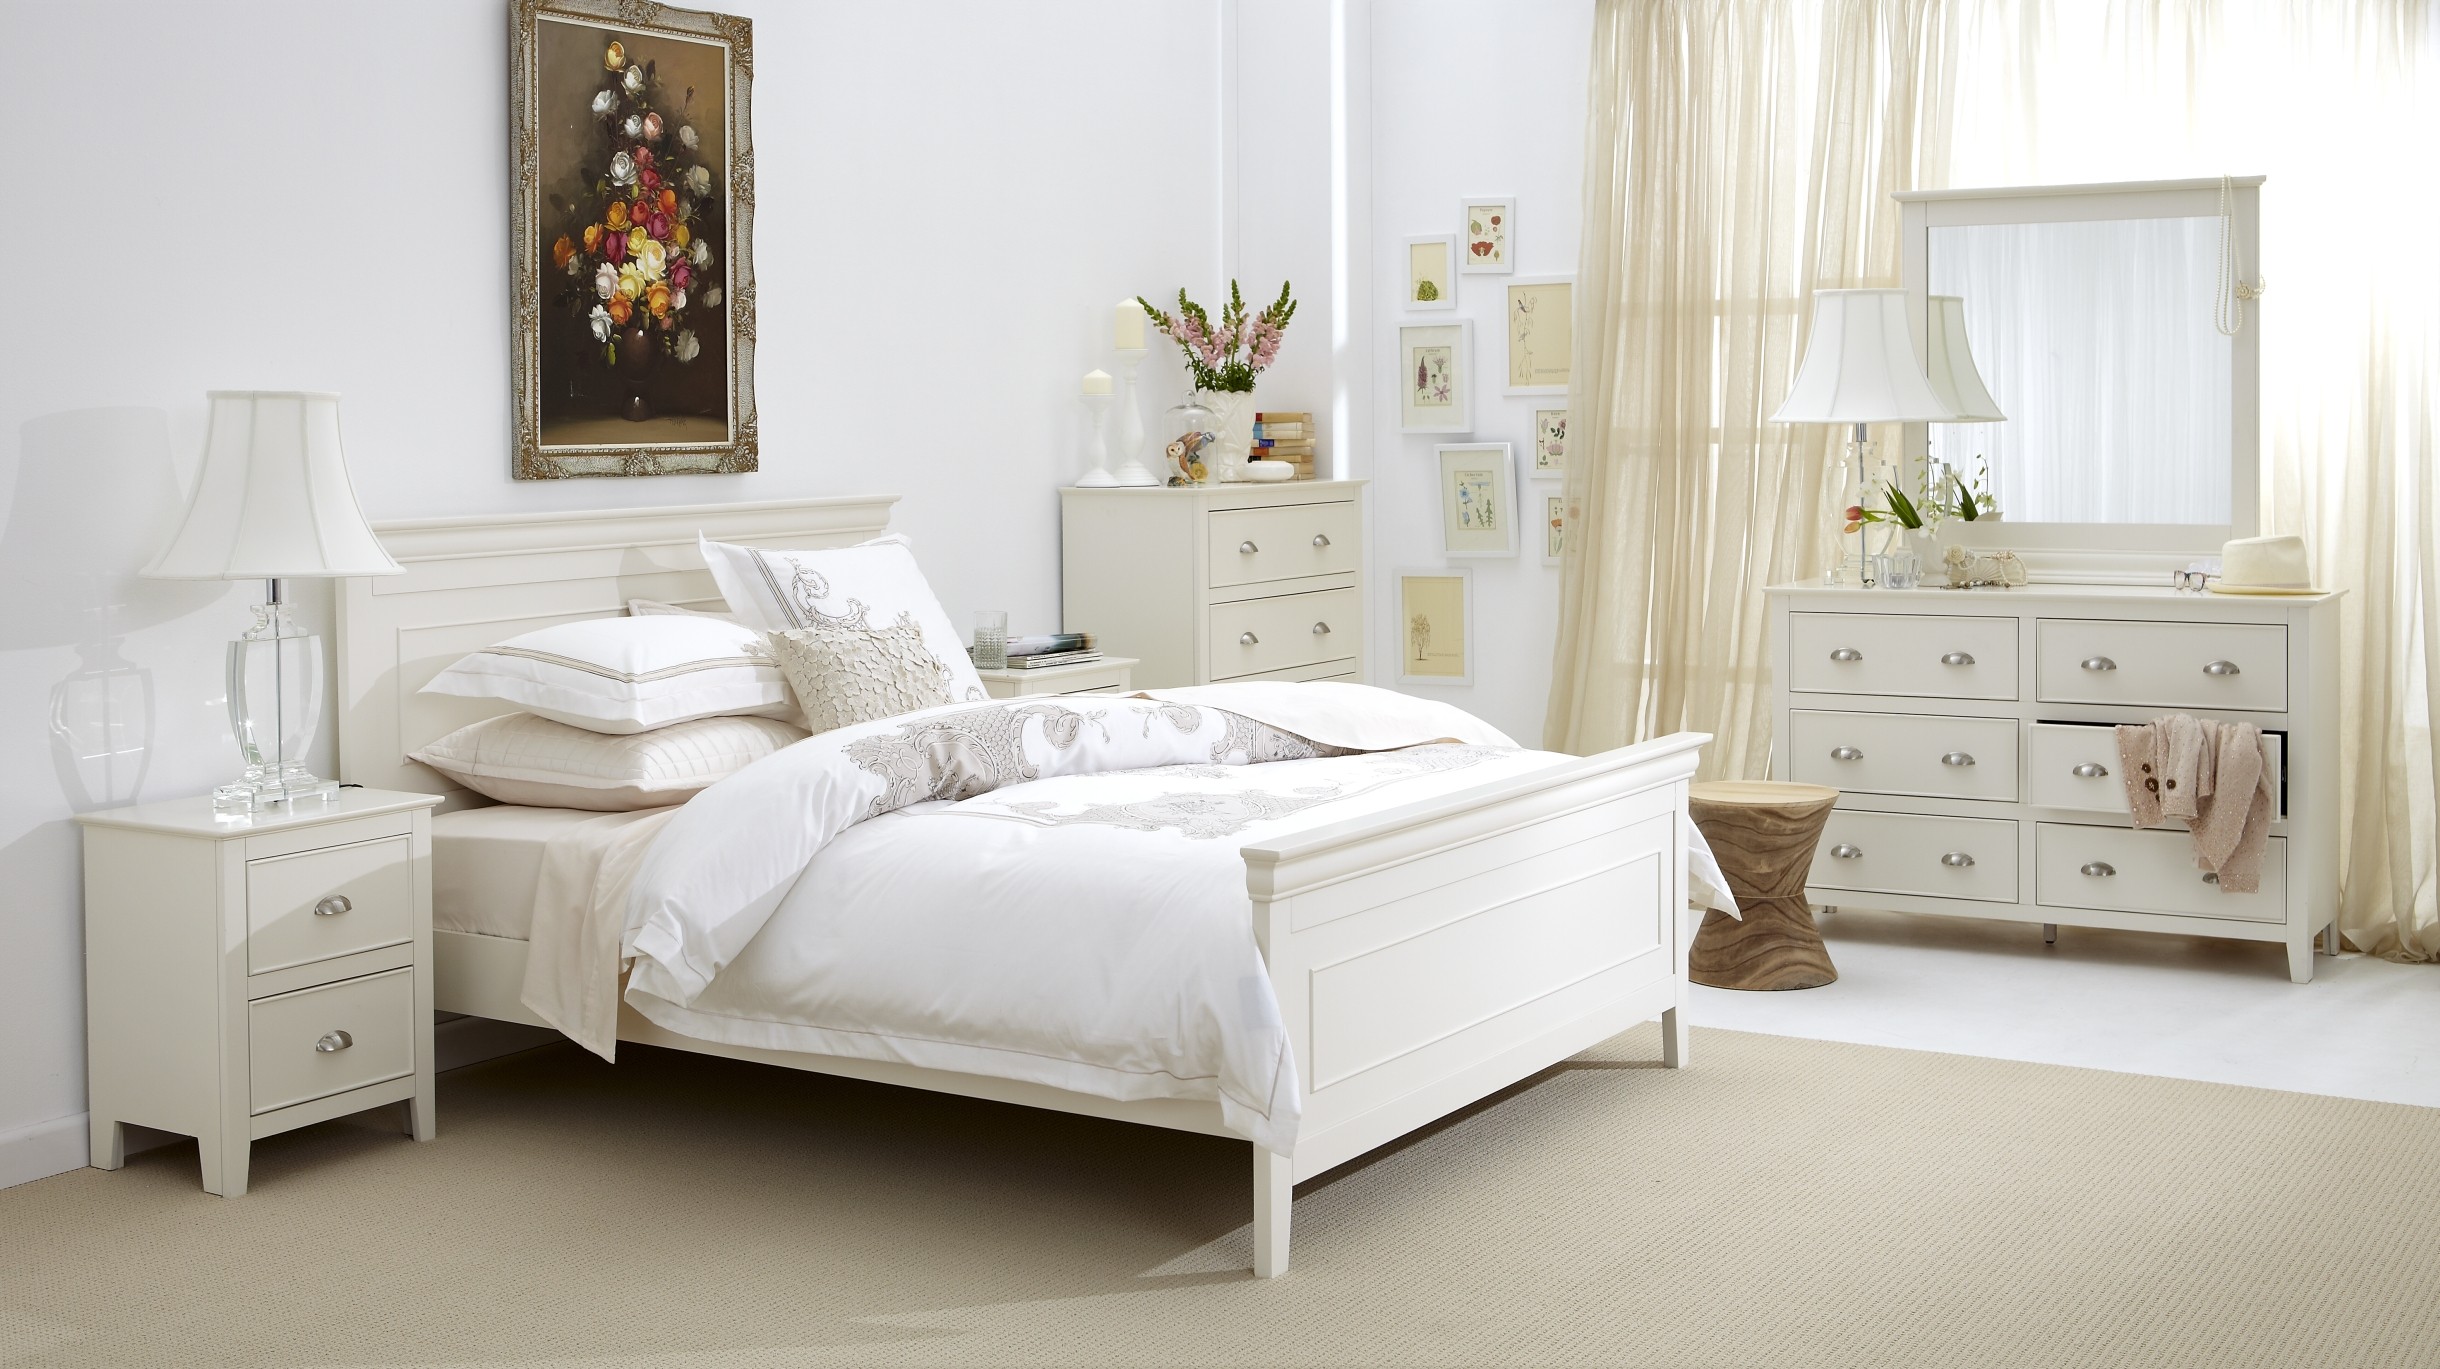 bedroom with white furniture decorating ideas photo - 3